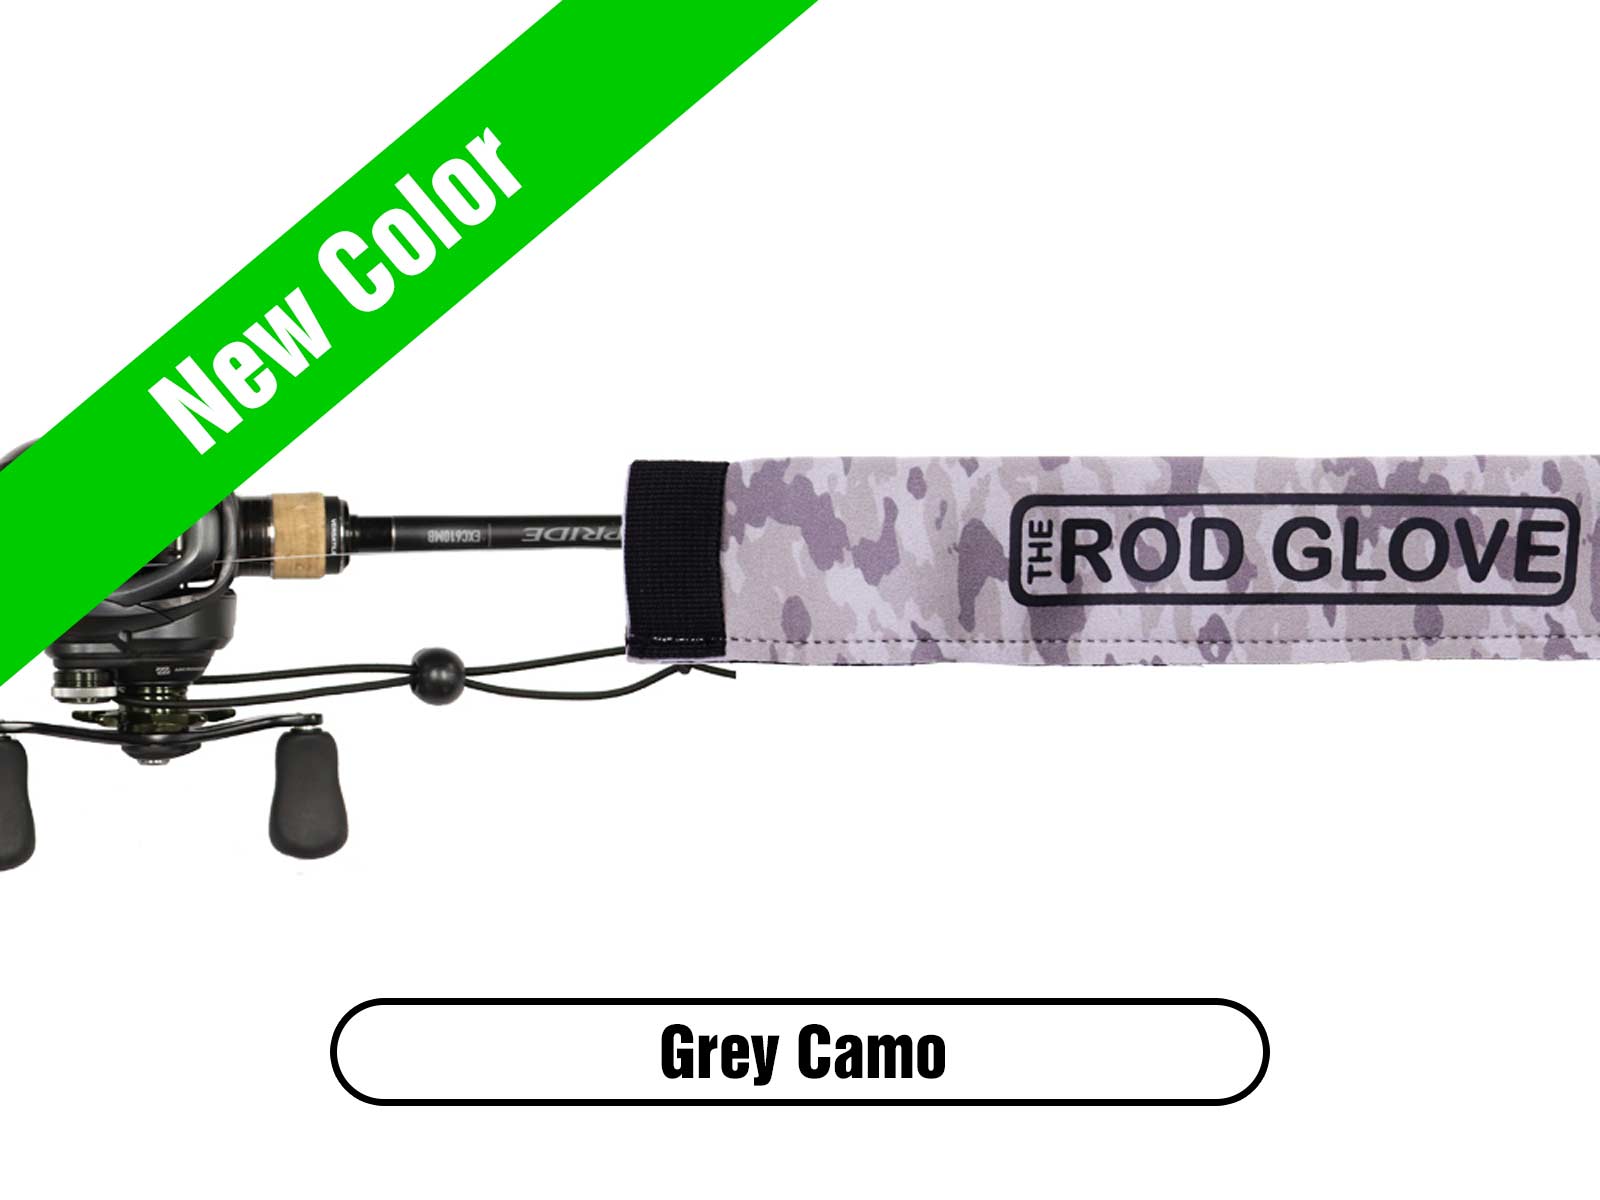 THE ROD GLOVE PRO SERIES VRX FISHING - STANDARD SPINNING SLEEVE